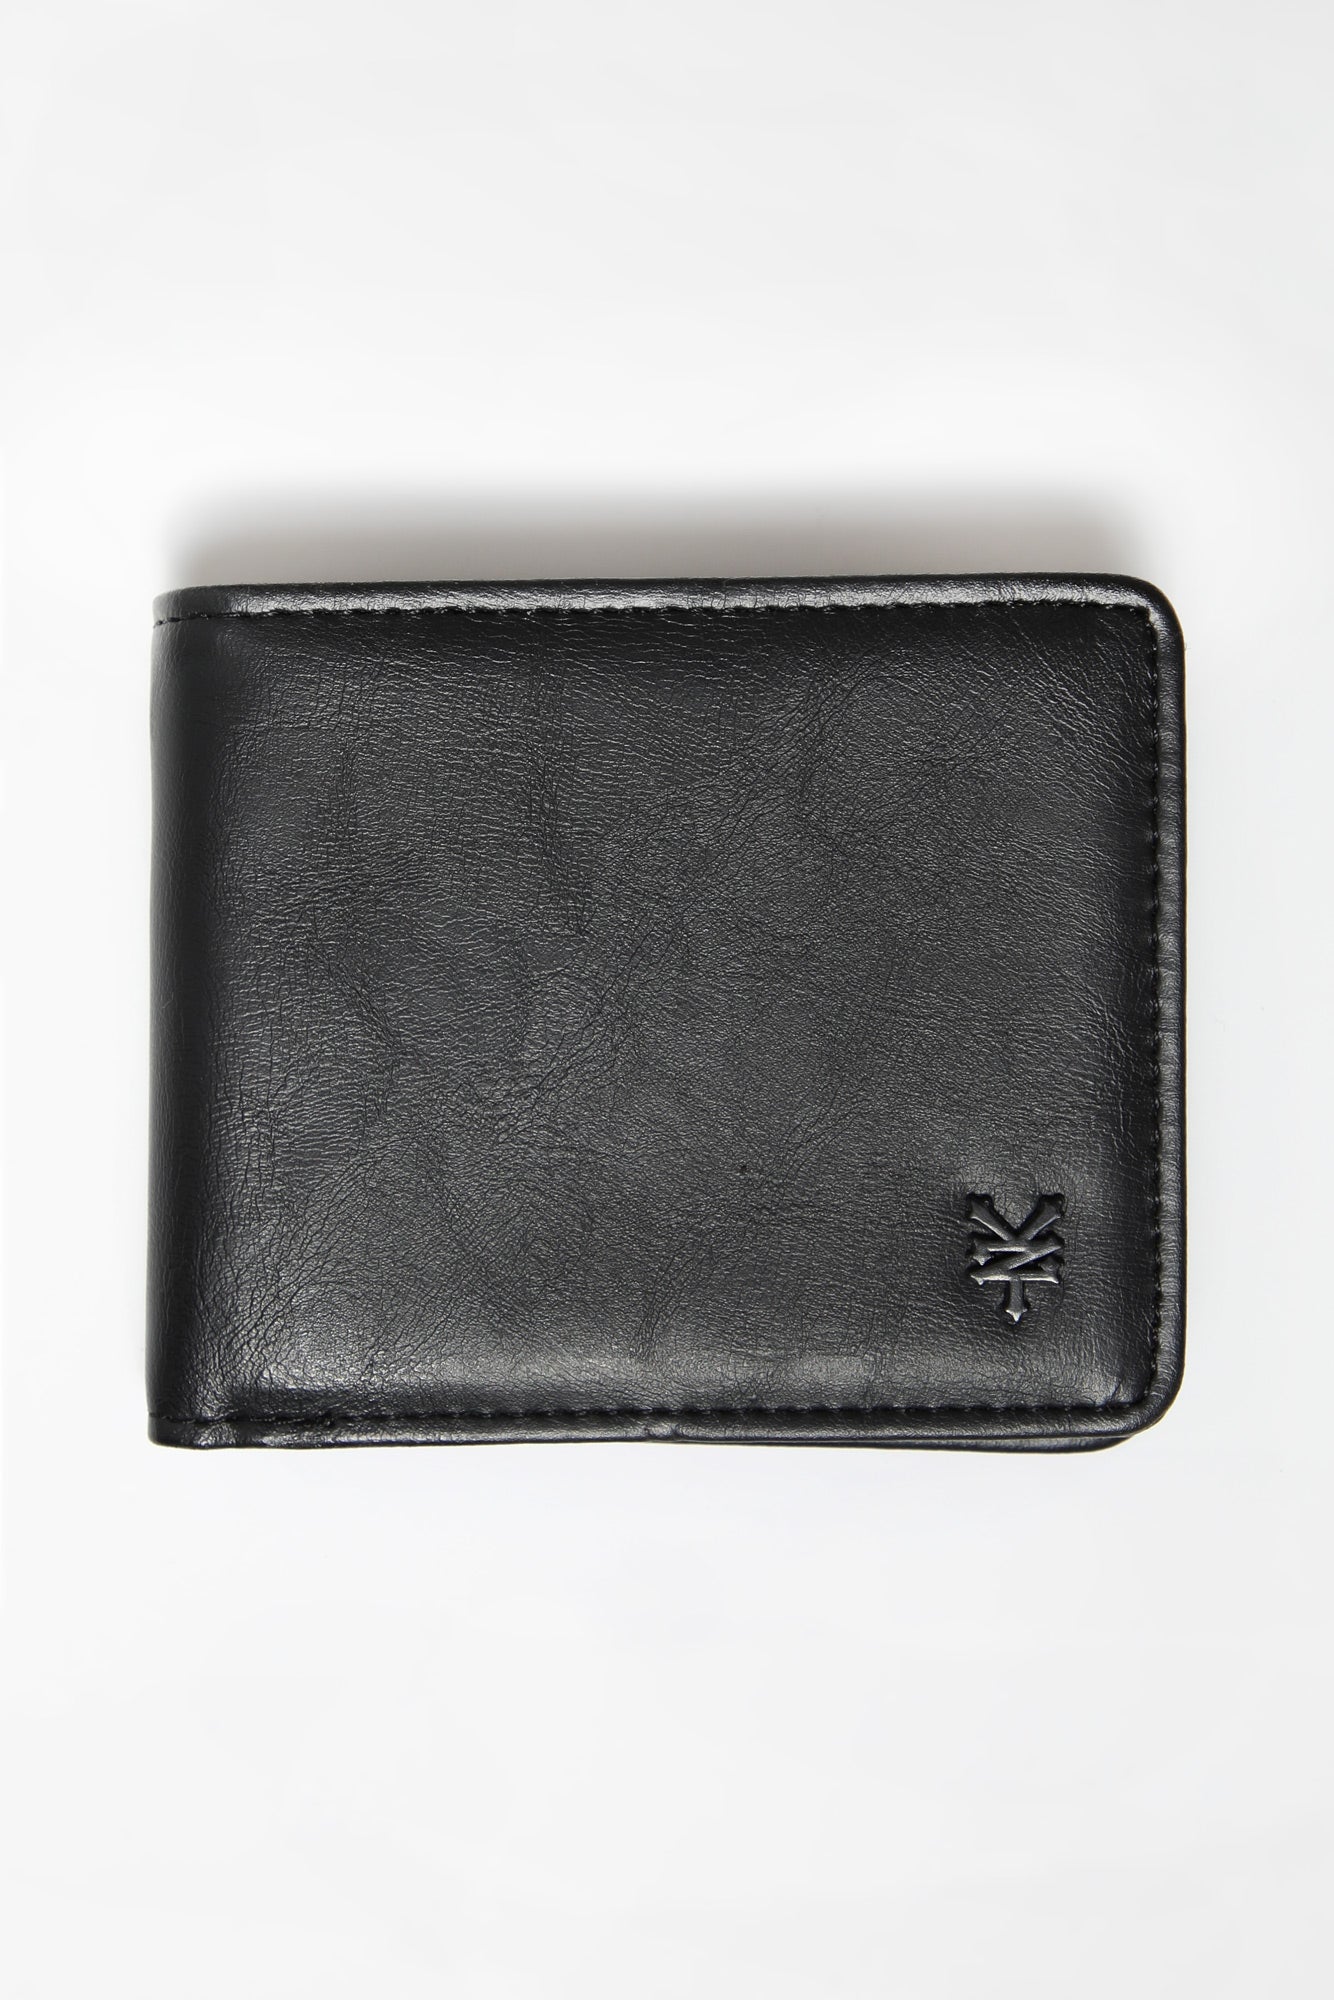 Zoo York Faux Leather Wallet - Black / O/S